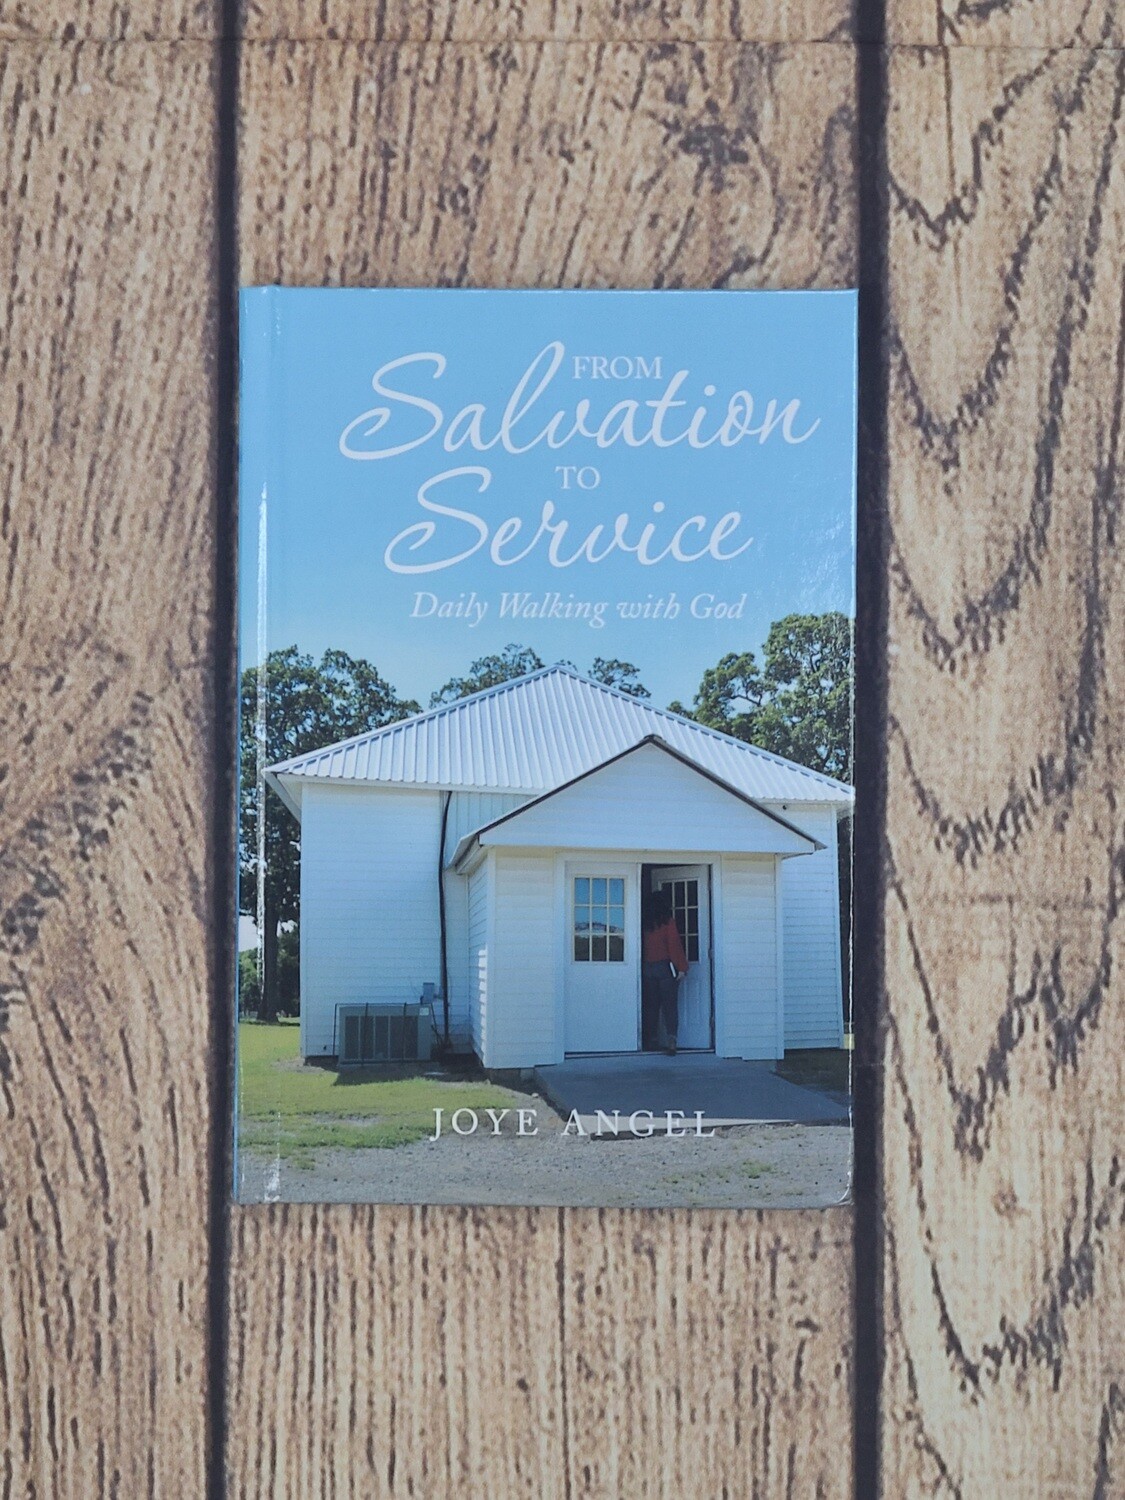 From Salvation to Service: Daily Walking with God by Joye Angel - Hardback